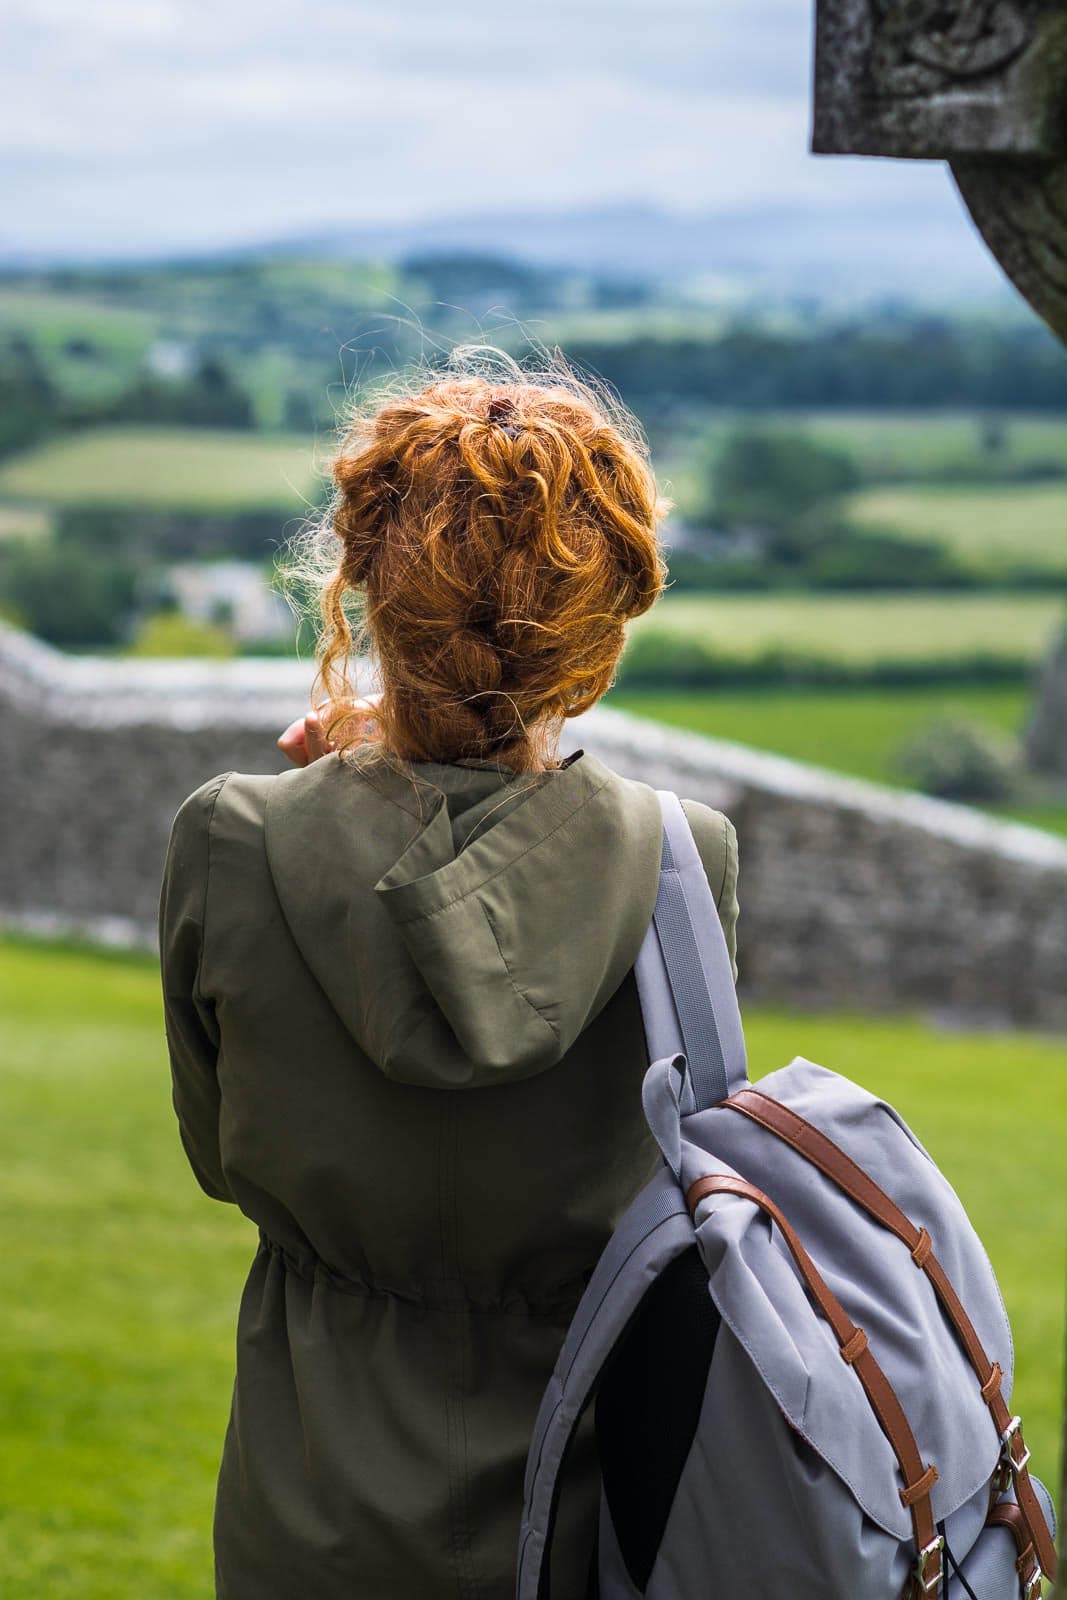 A woman with a backpack looking out over a field.